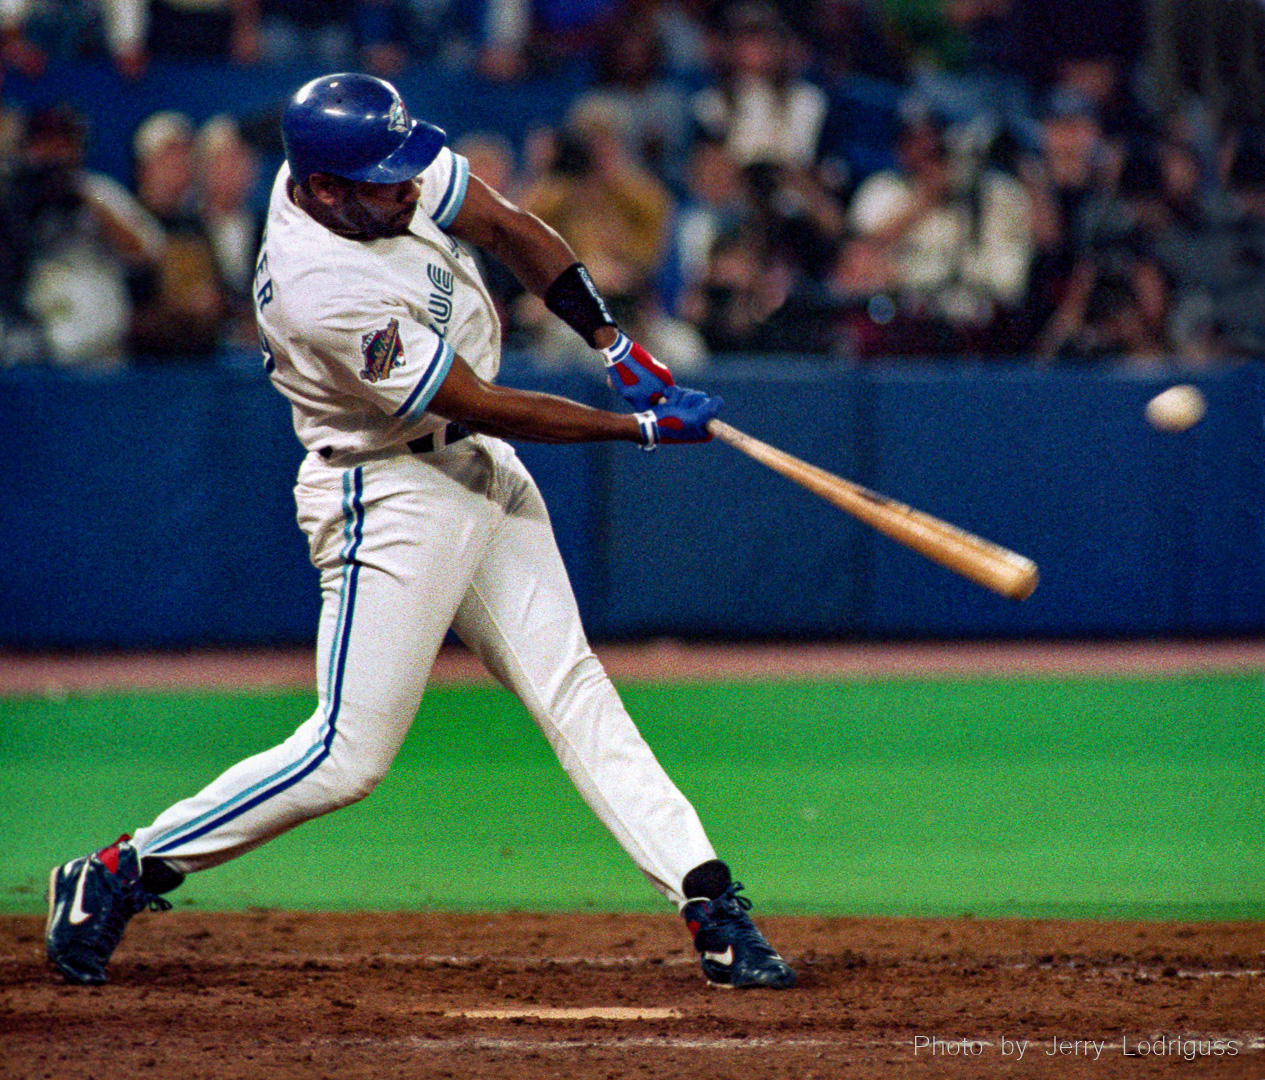 Toronto Blue Jays' Joe Carter hits a 2-2 fastball down and in over the wall in left field off the Phillies Mitch Williams for his game-winning, three-run 379 foot home run in the bottom of the ninth inning of game six, leading his team to the World Championship with a 8-6 victory over the Philadelphia Phillies on Saturday October 23, 1993 at Skydome in Toronto. It was the first bottom-of-the-ninth inning, walk-off, come-from-behind, series-winning  home run  in the history of the World Series.